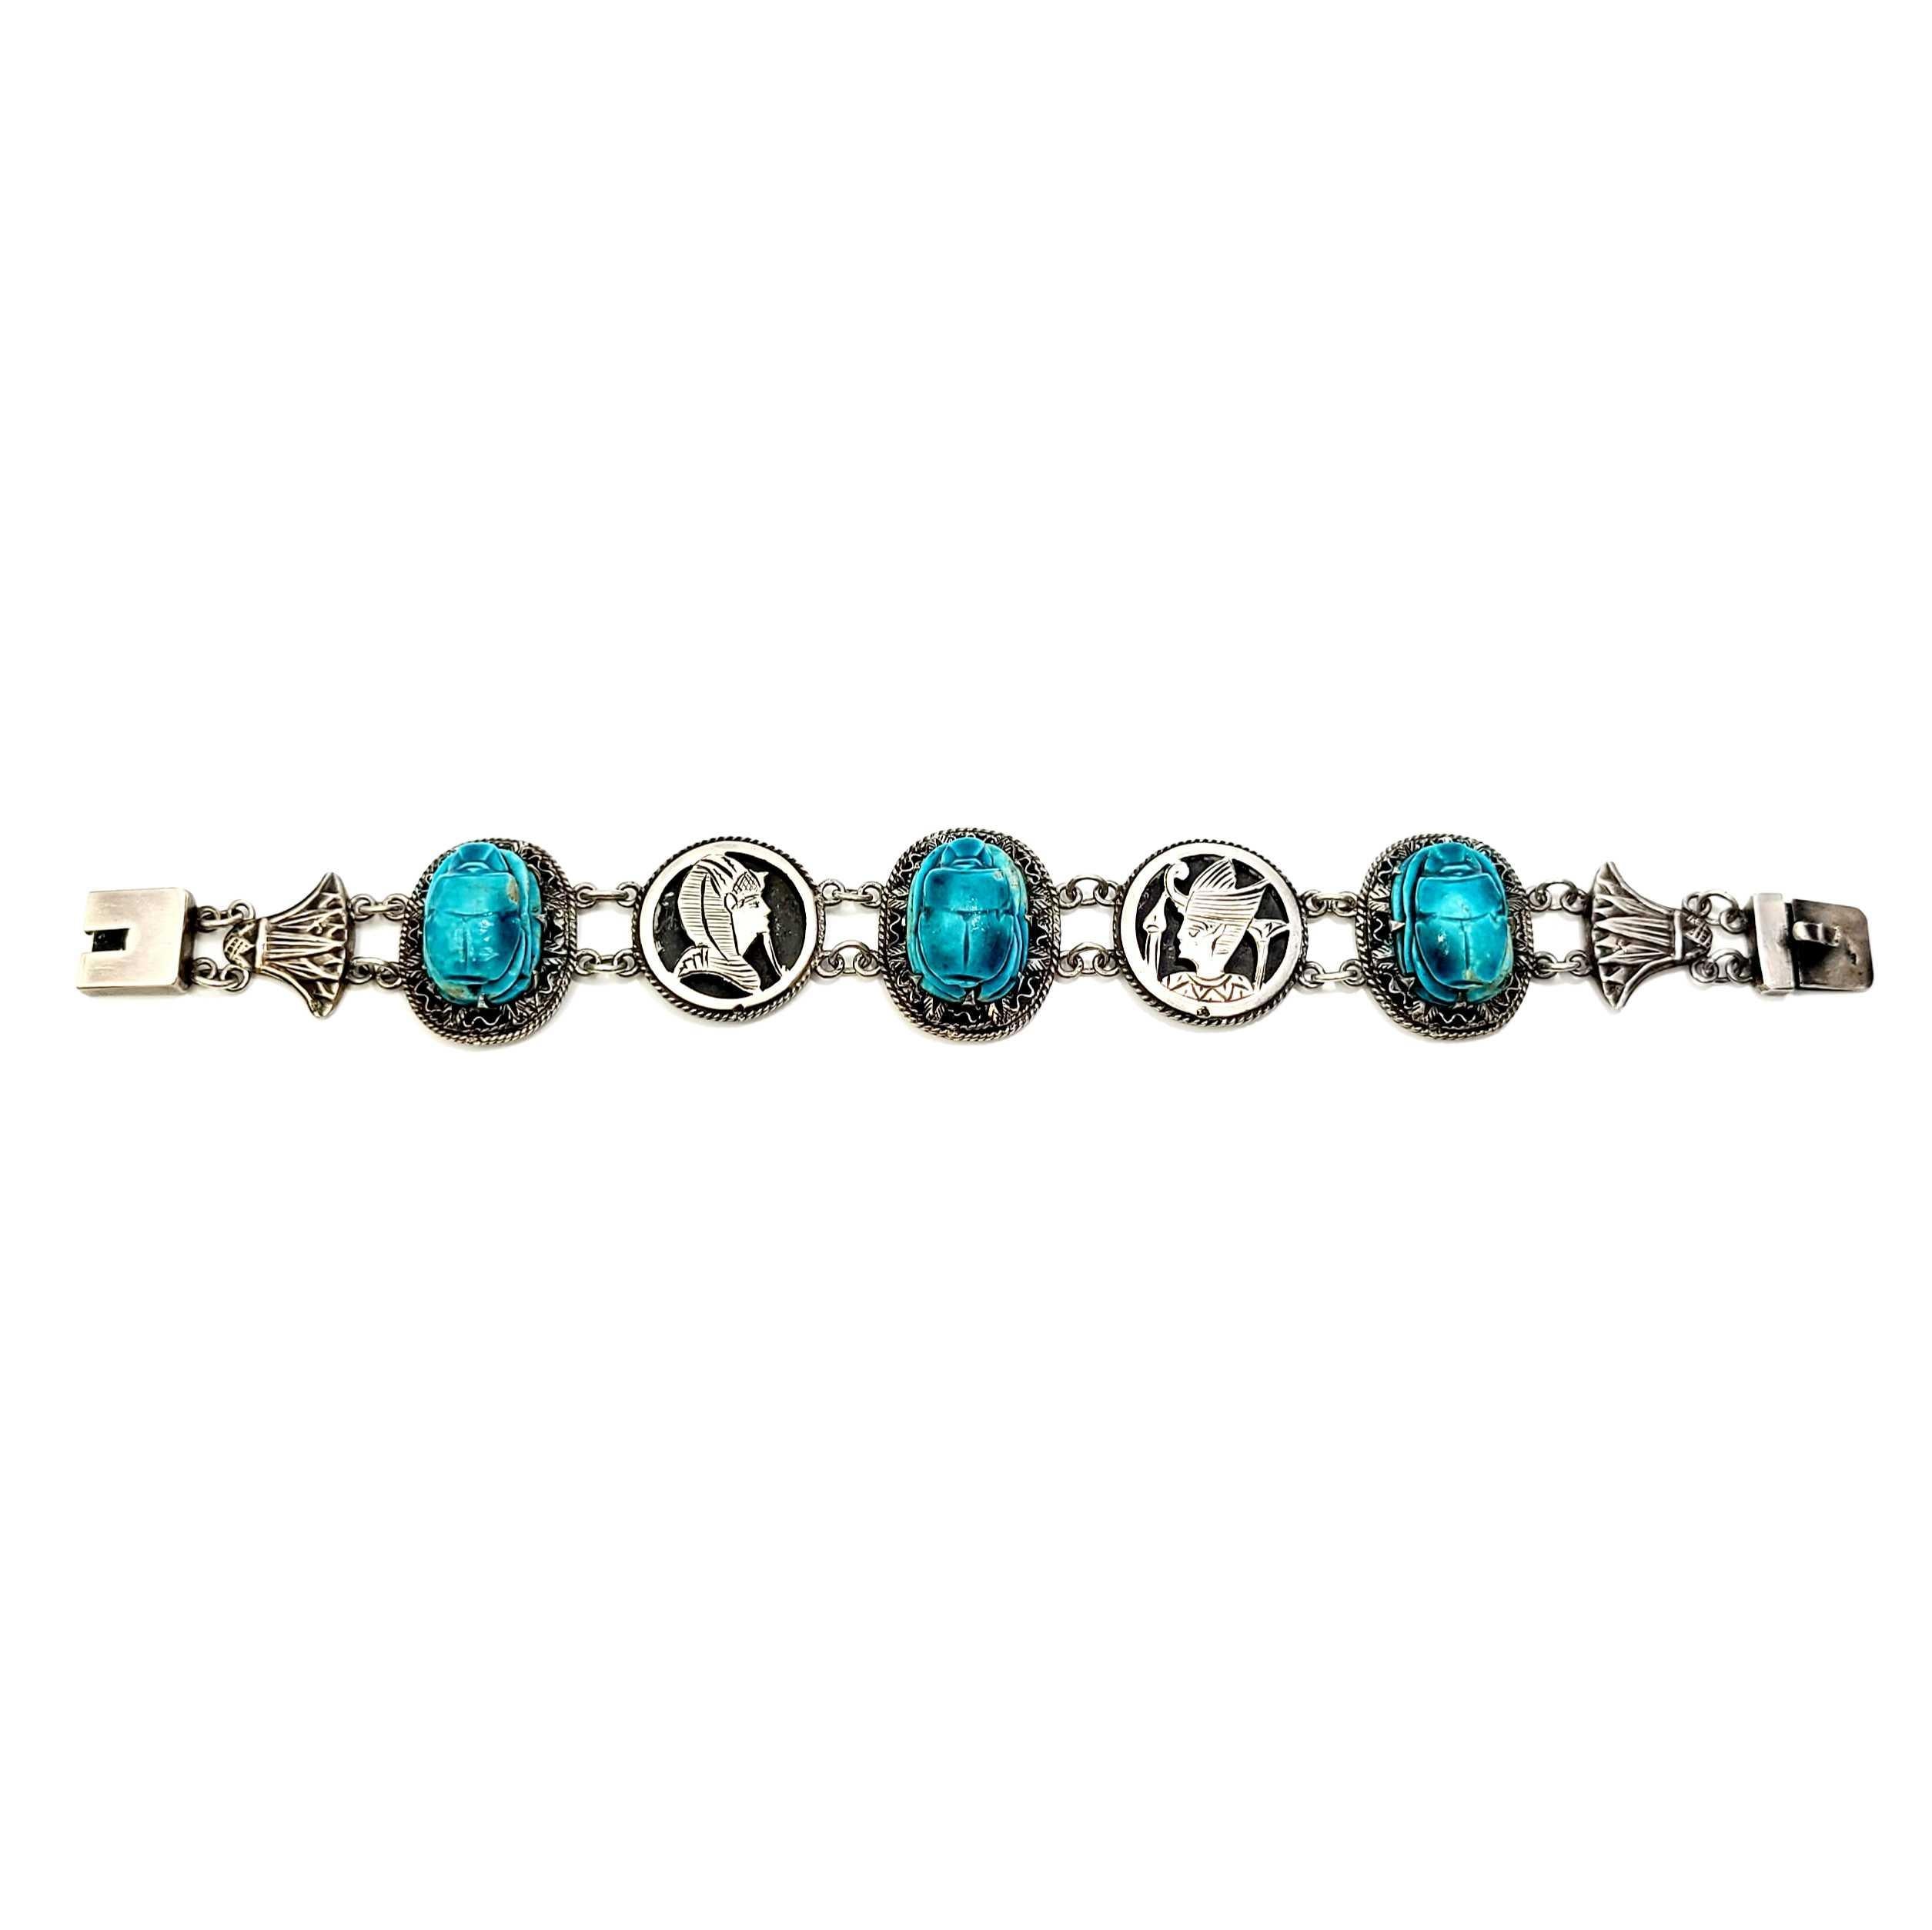 Silver Egyptian Revival scarab bracelet, c.1930s.

Popular in the 1930s, when King Tut's tomb was found, this example of an Egyptian Revival bracelet features 3 carved hand painted faience pottery oval beetles, alternating with King Tut